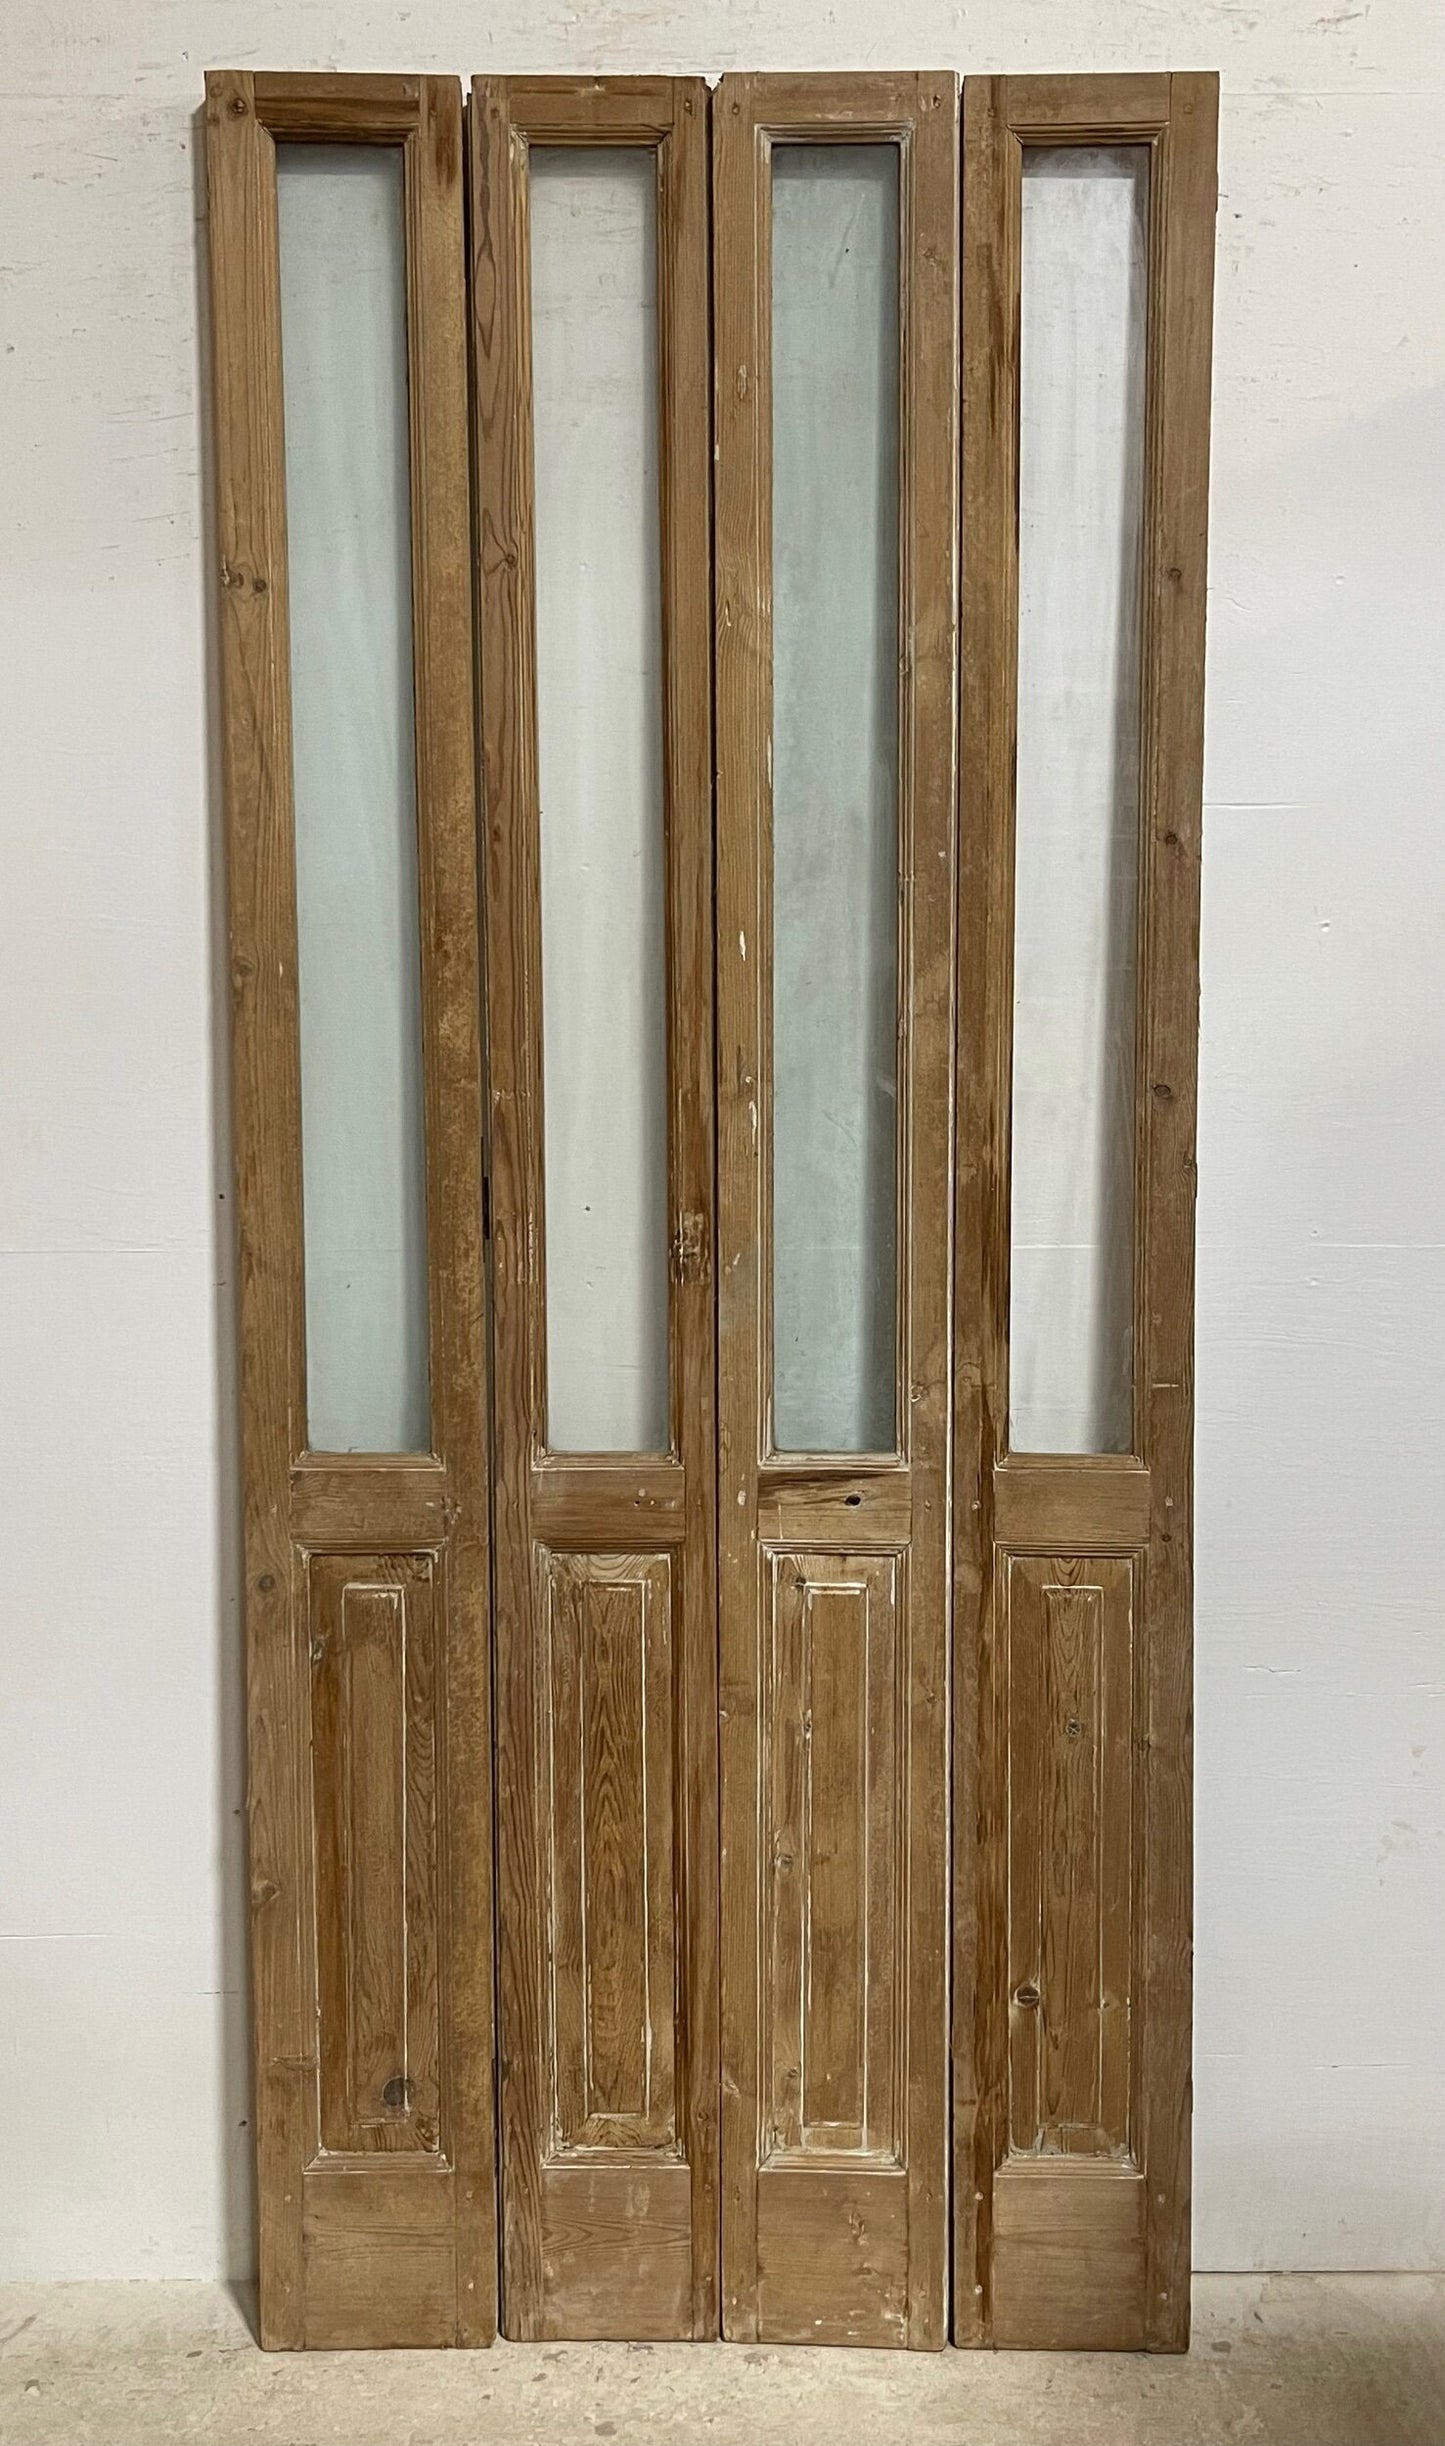 Antique French doors with glass (96x41.5) H0241s